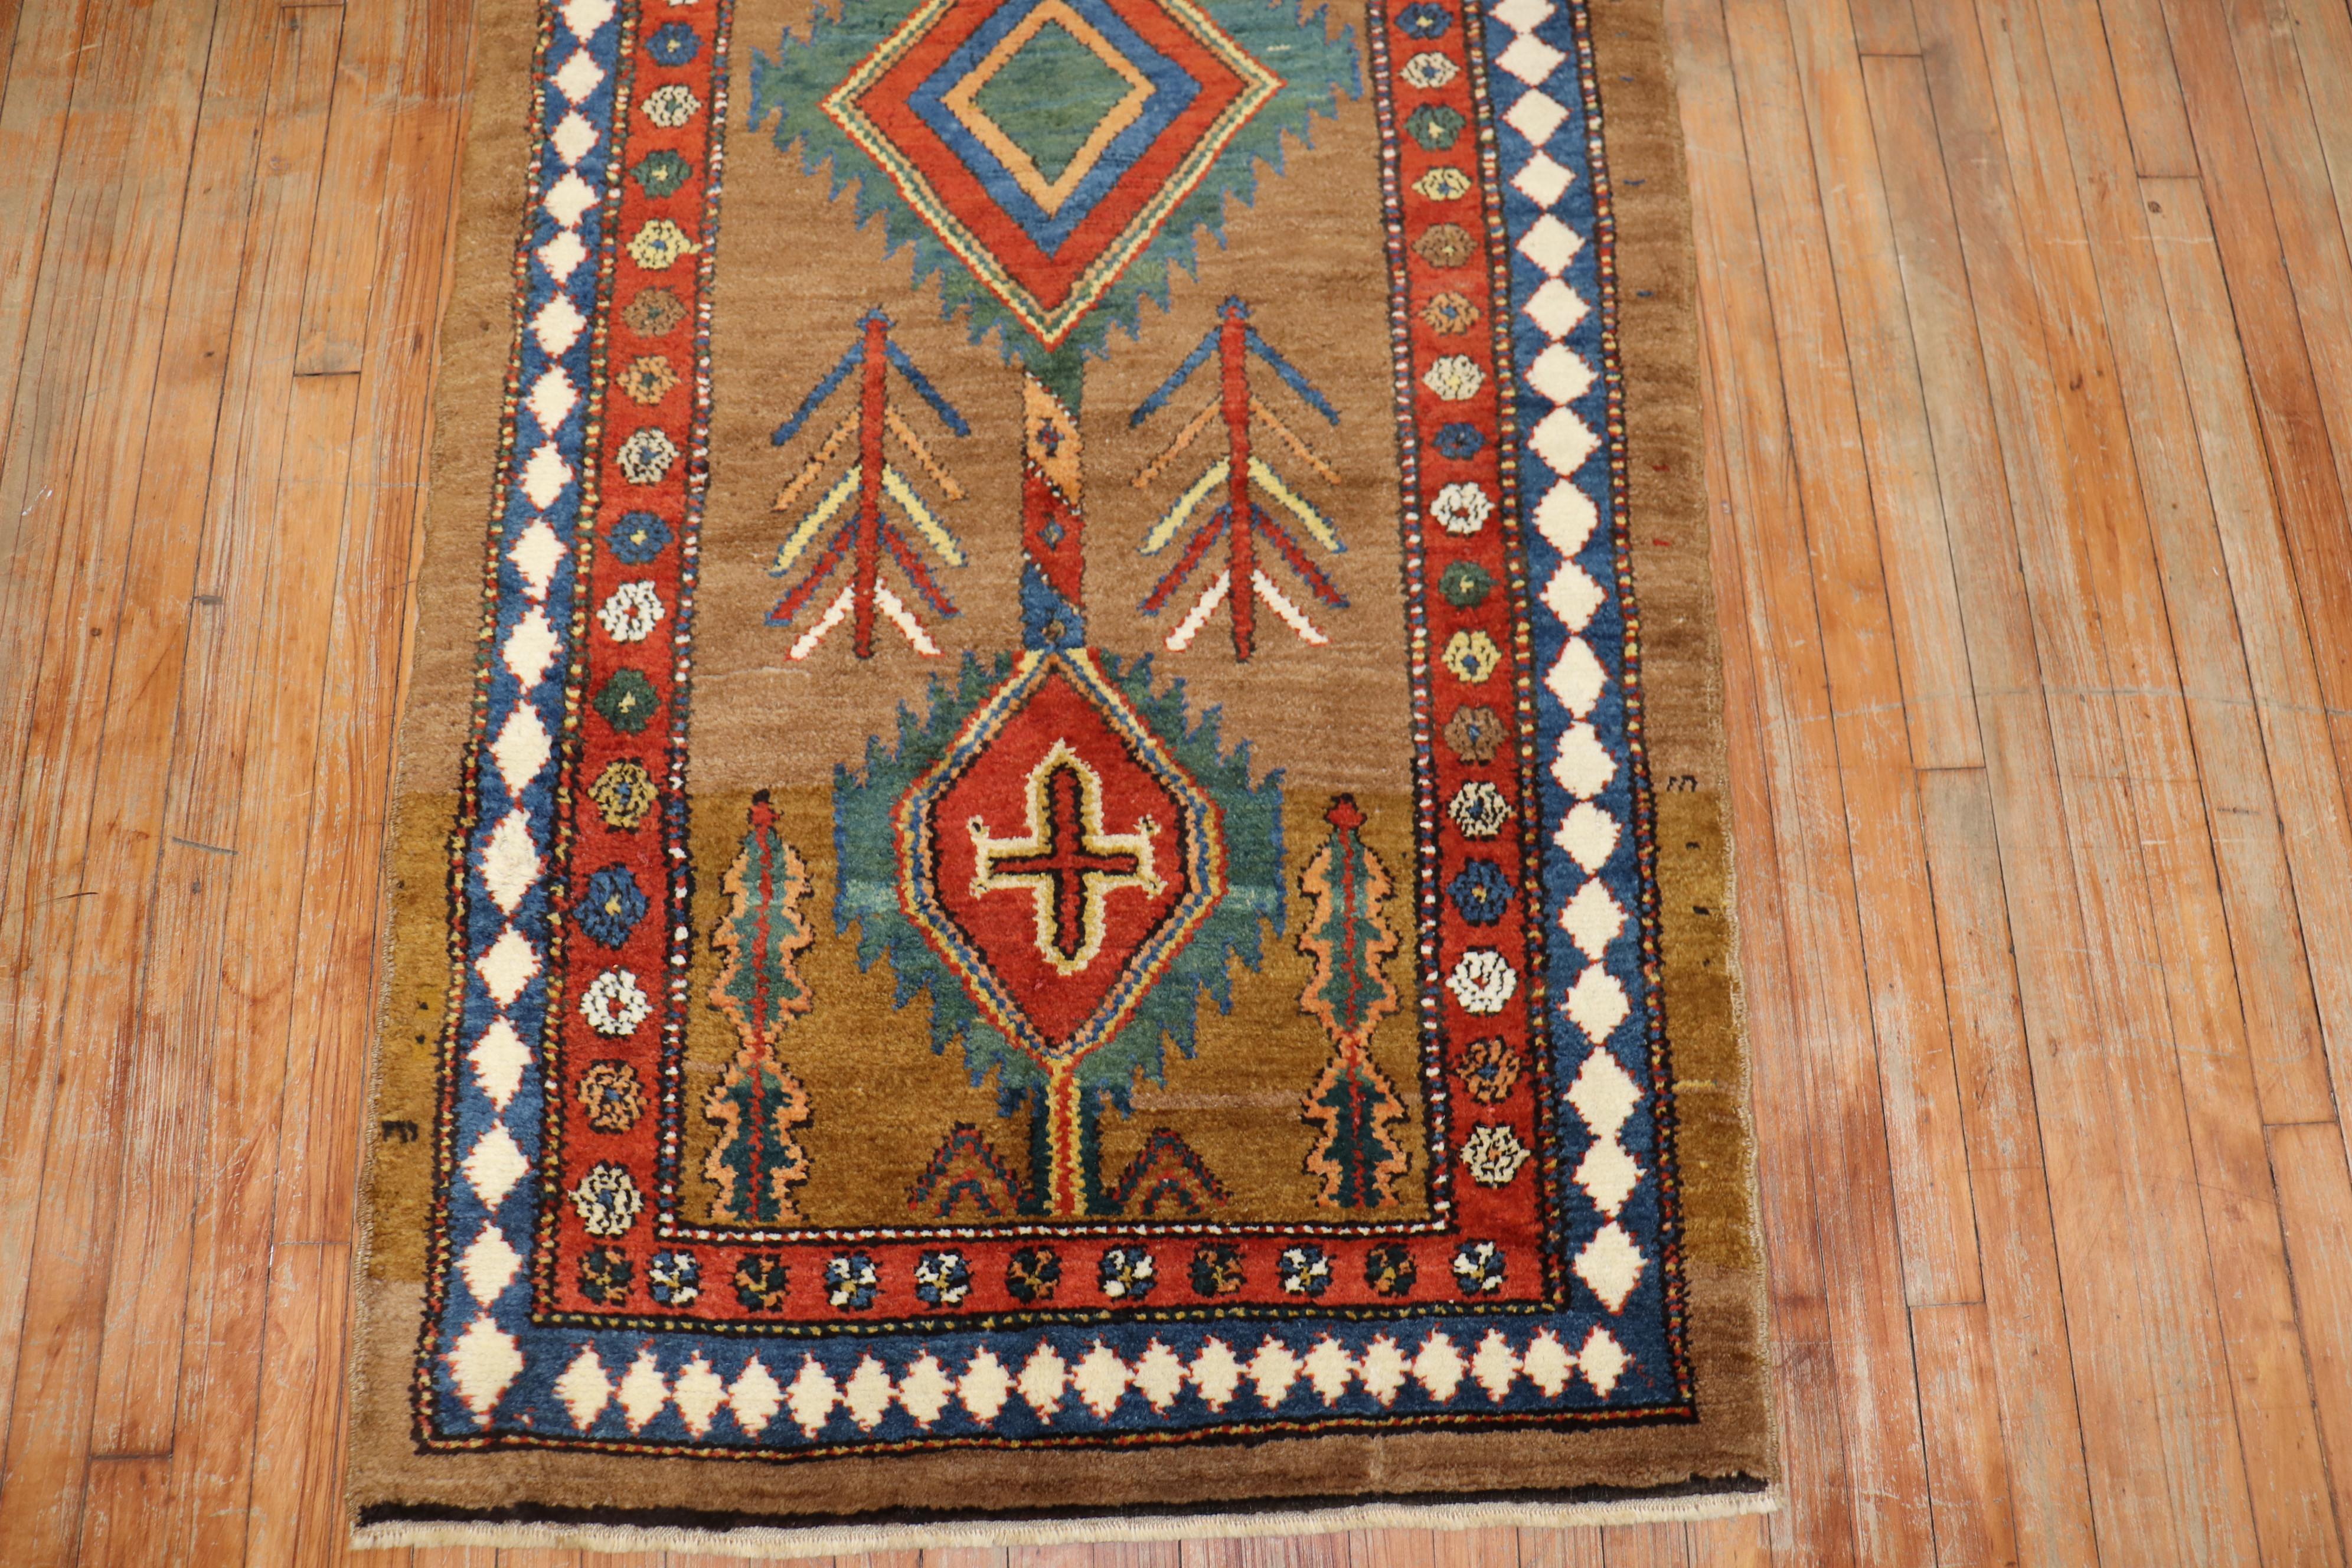 Highly collectible full pile Persian Serab runner with a camel color ground and bold geometric nomadi motif, circa 1920.

Measures: 3'5'' x 9' 

The best antique rugs and carpets utilizing un-dyed camelhair are quite rare, as they represent a